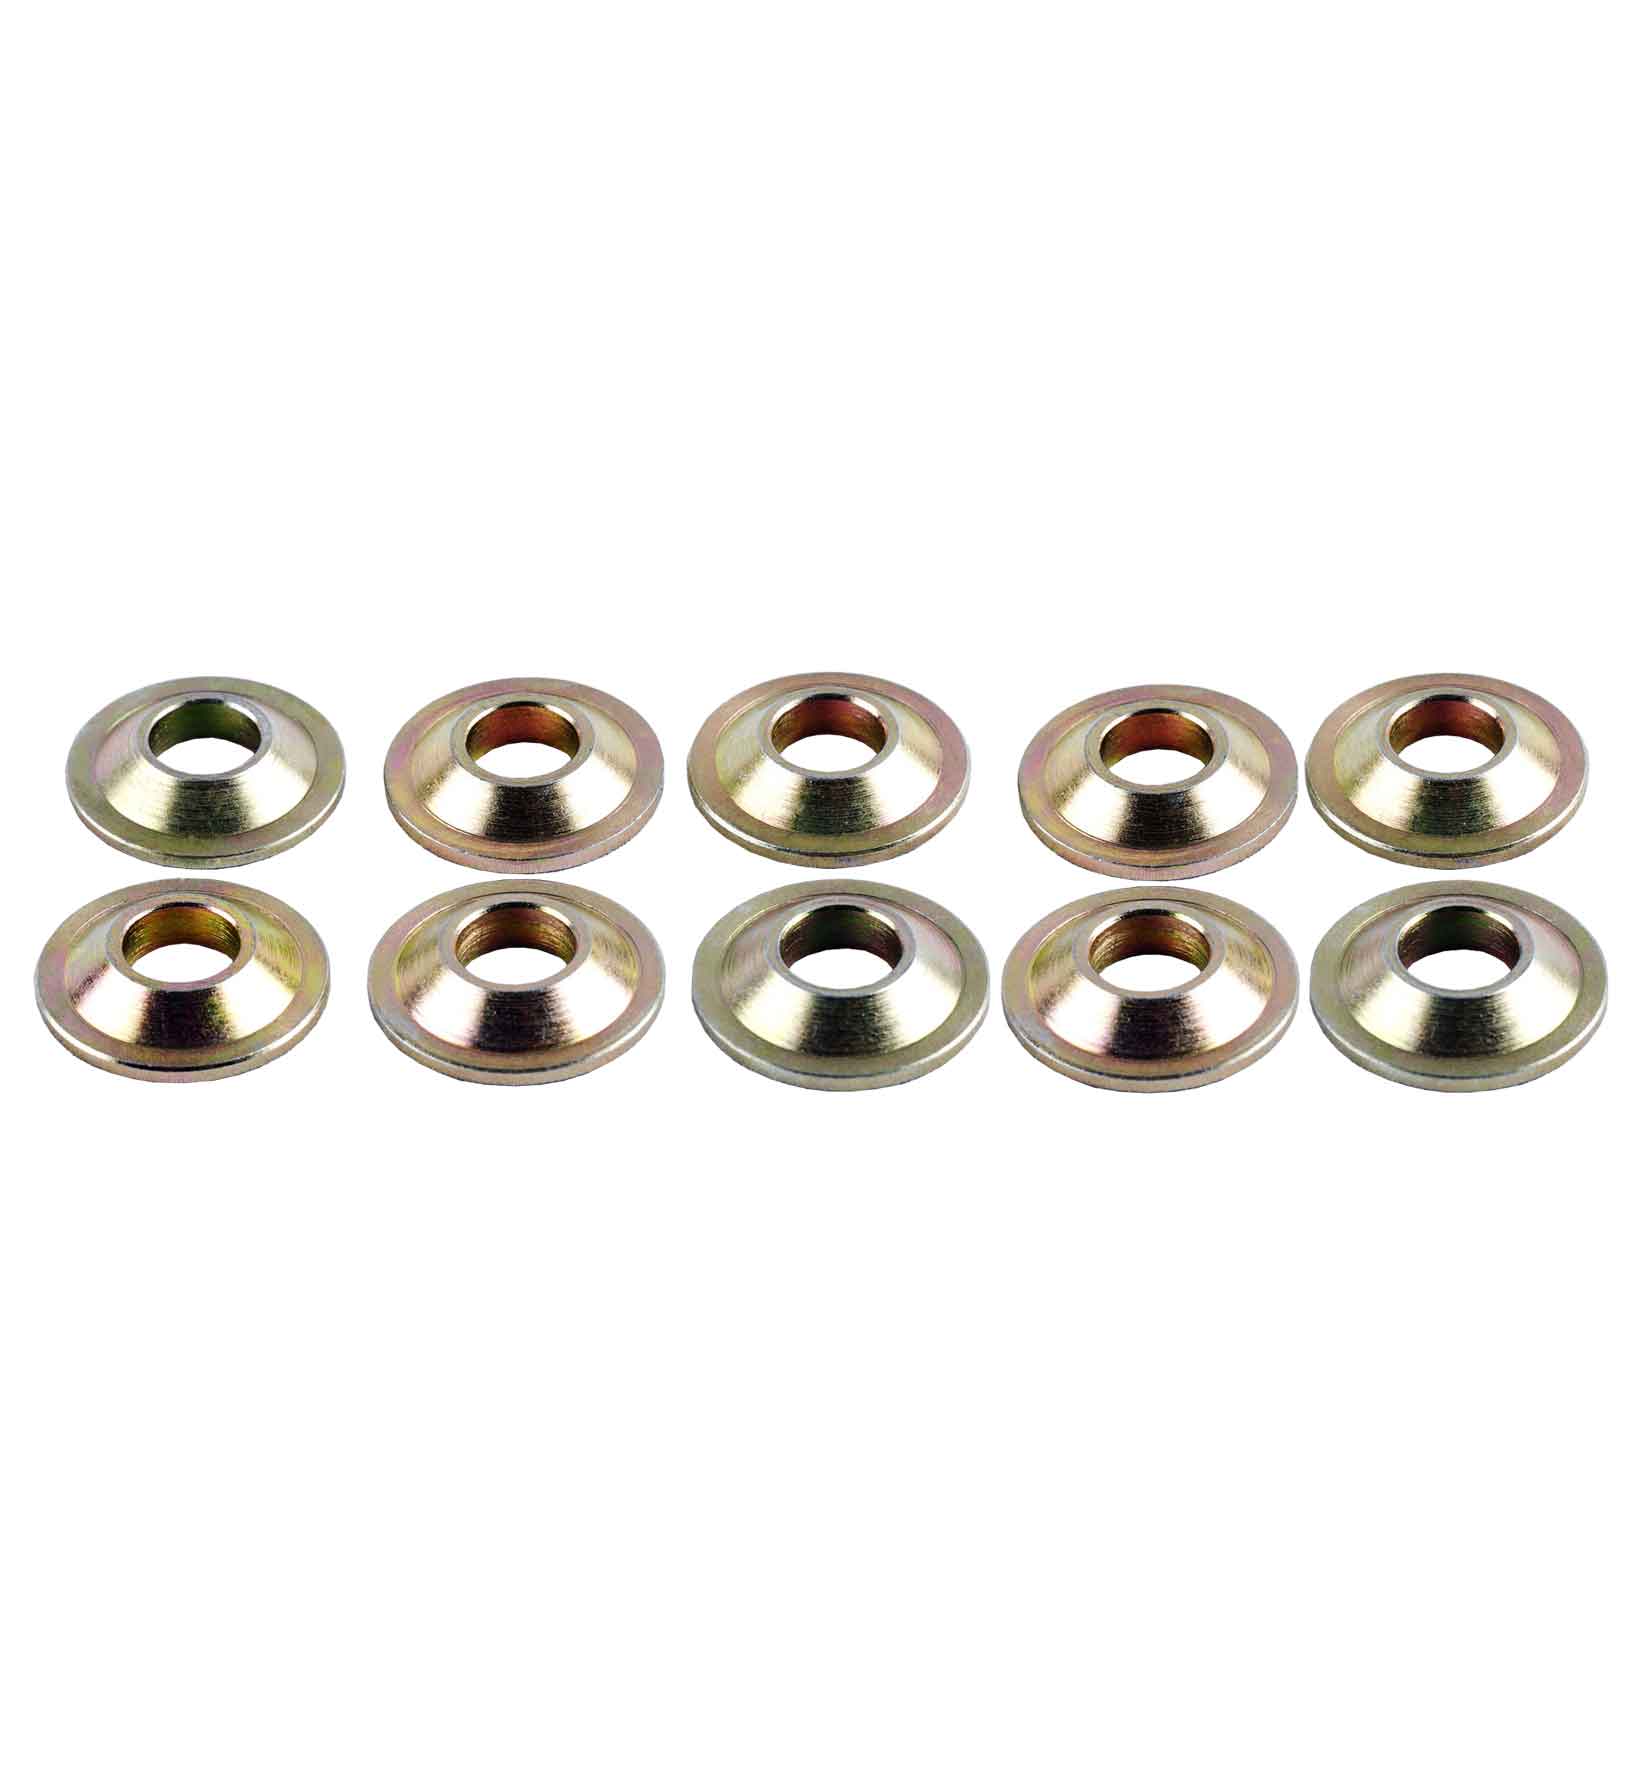 M10 Rod End Misalignment Spacers 10mm (Pack of 10)